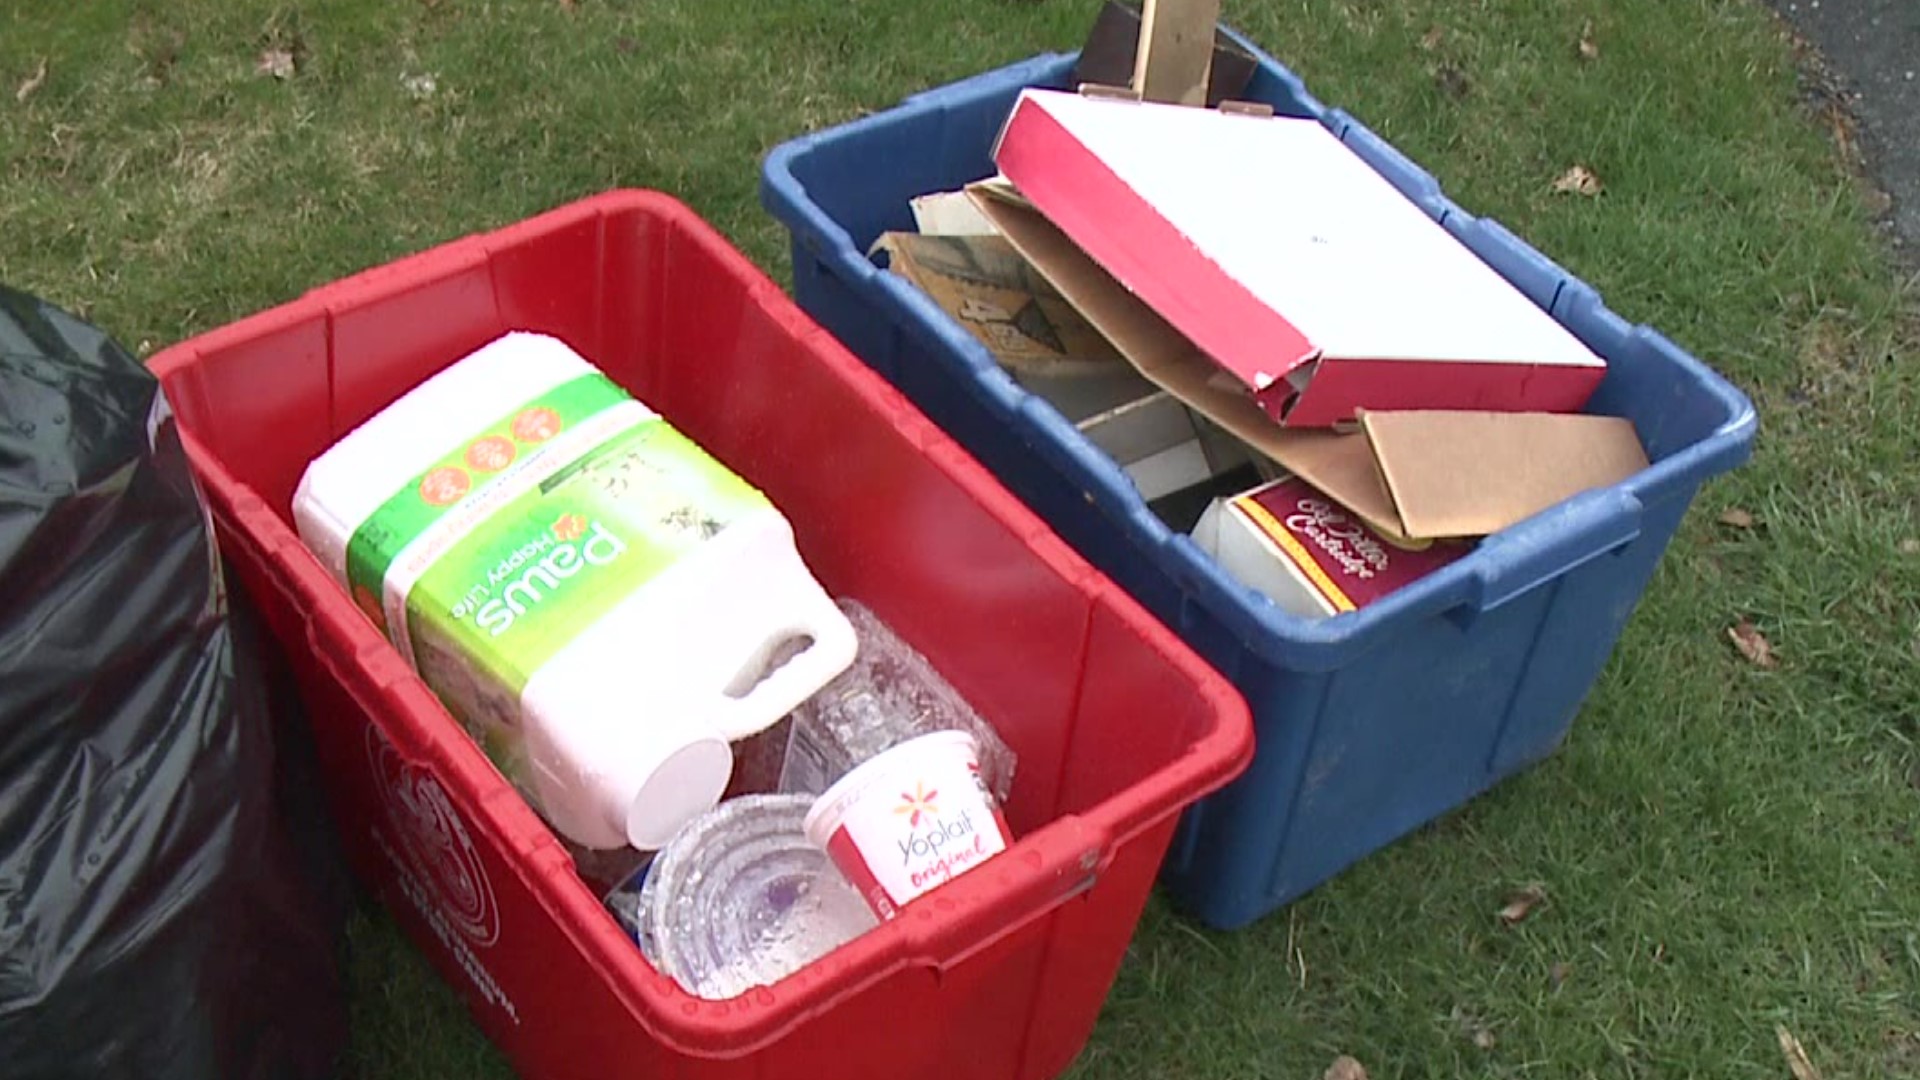 Folks in the Dallas area of Luzerne County are dealing with changes to their recycling pick-ups.